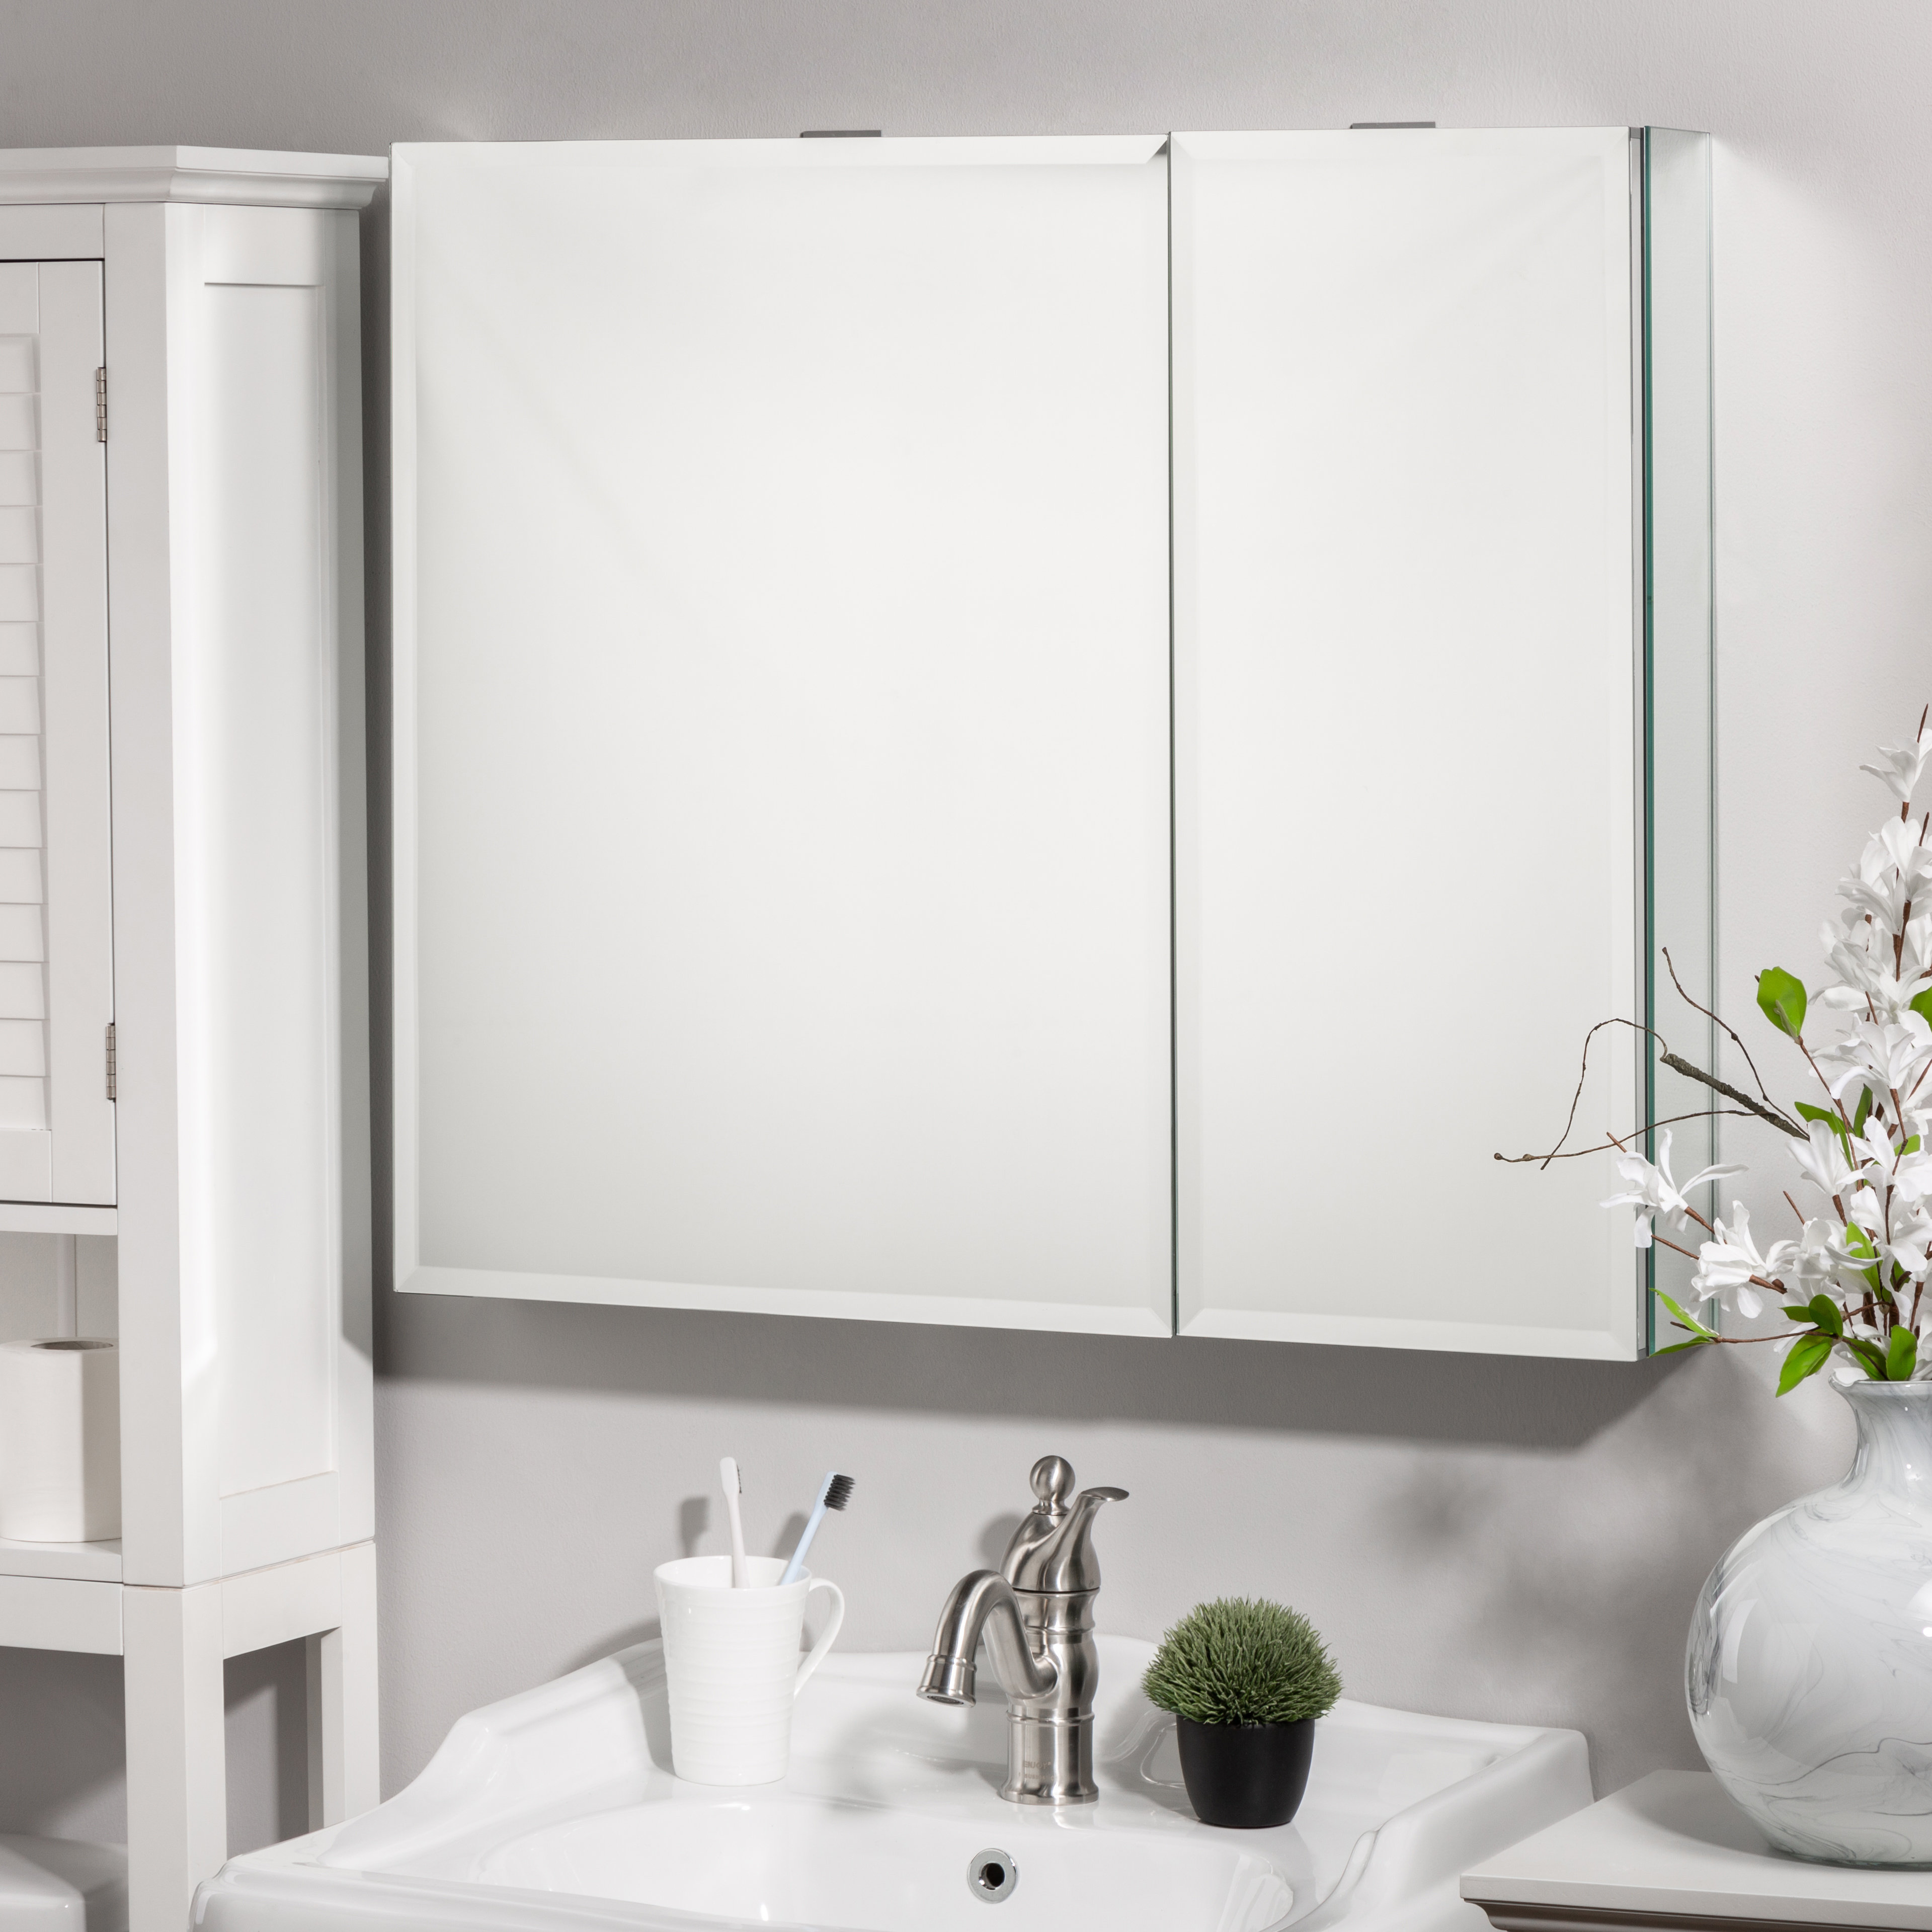 Derring Recessed Frameless Medicine Cabinet with 2 Adjustable Shelves and  Interior Mirror & Reviews